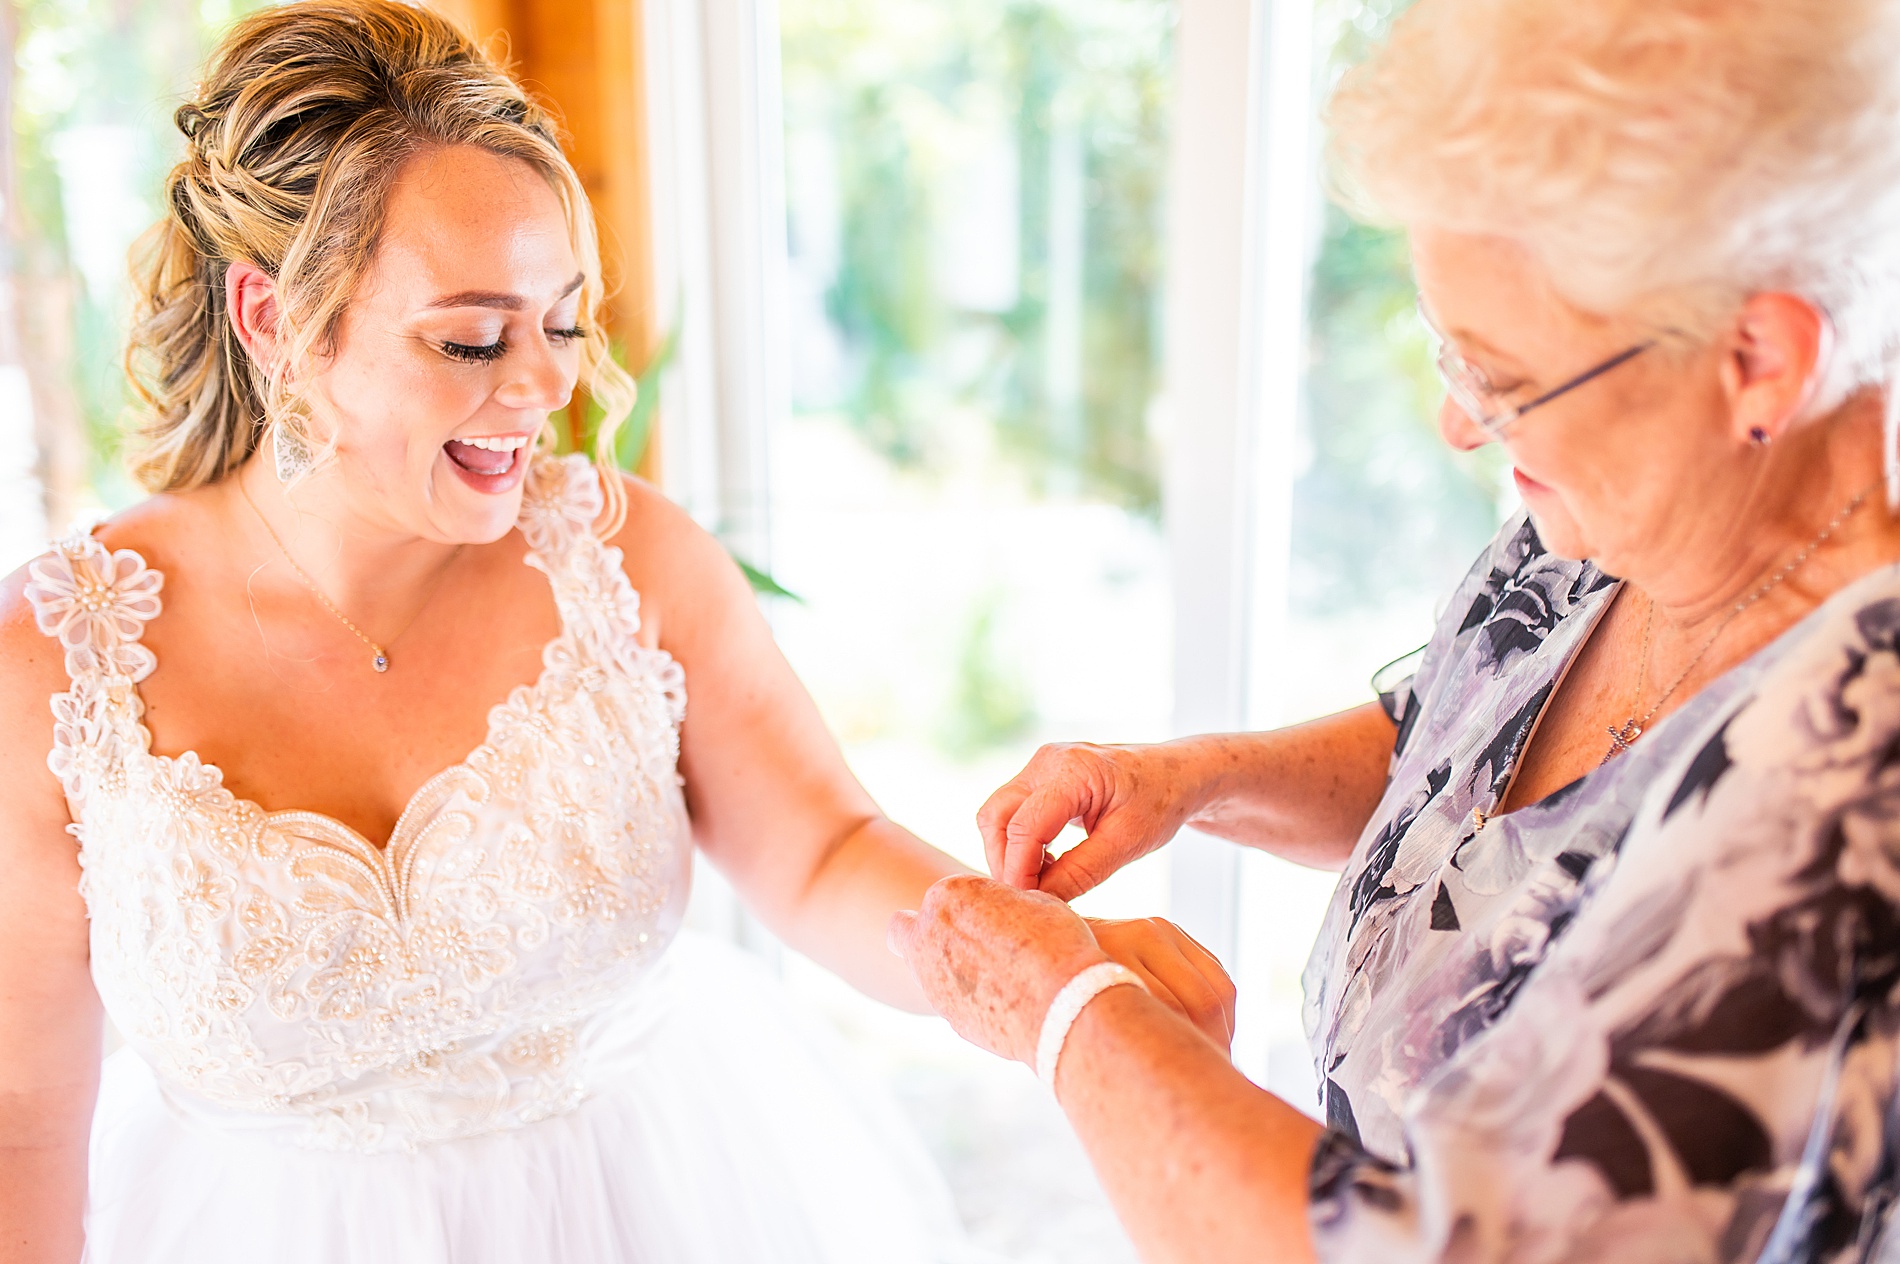 bride's grandmother gives her bracelet to wear for wedding day